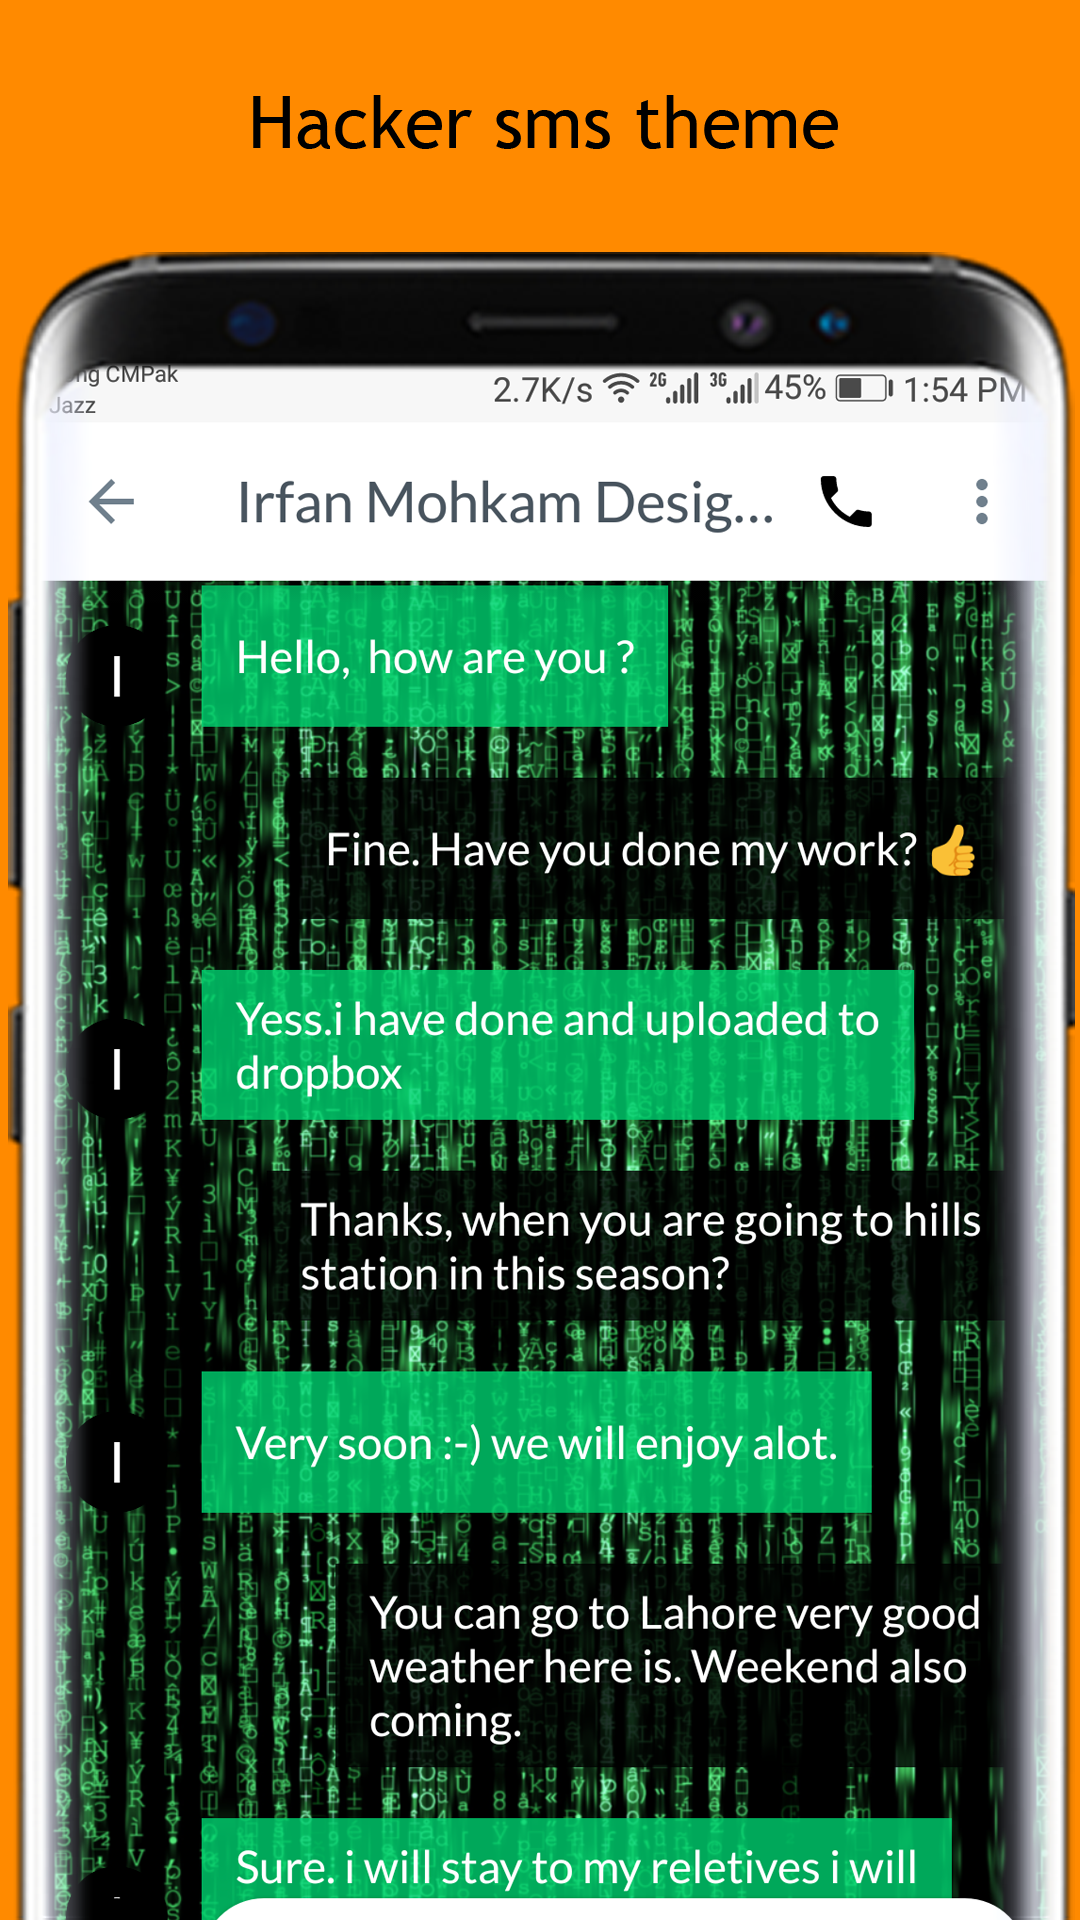 Hacker SMS Theme for Android - APK Download - 